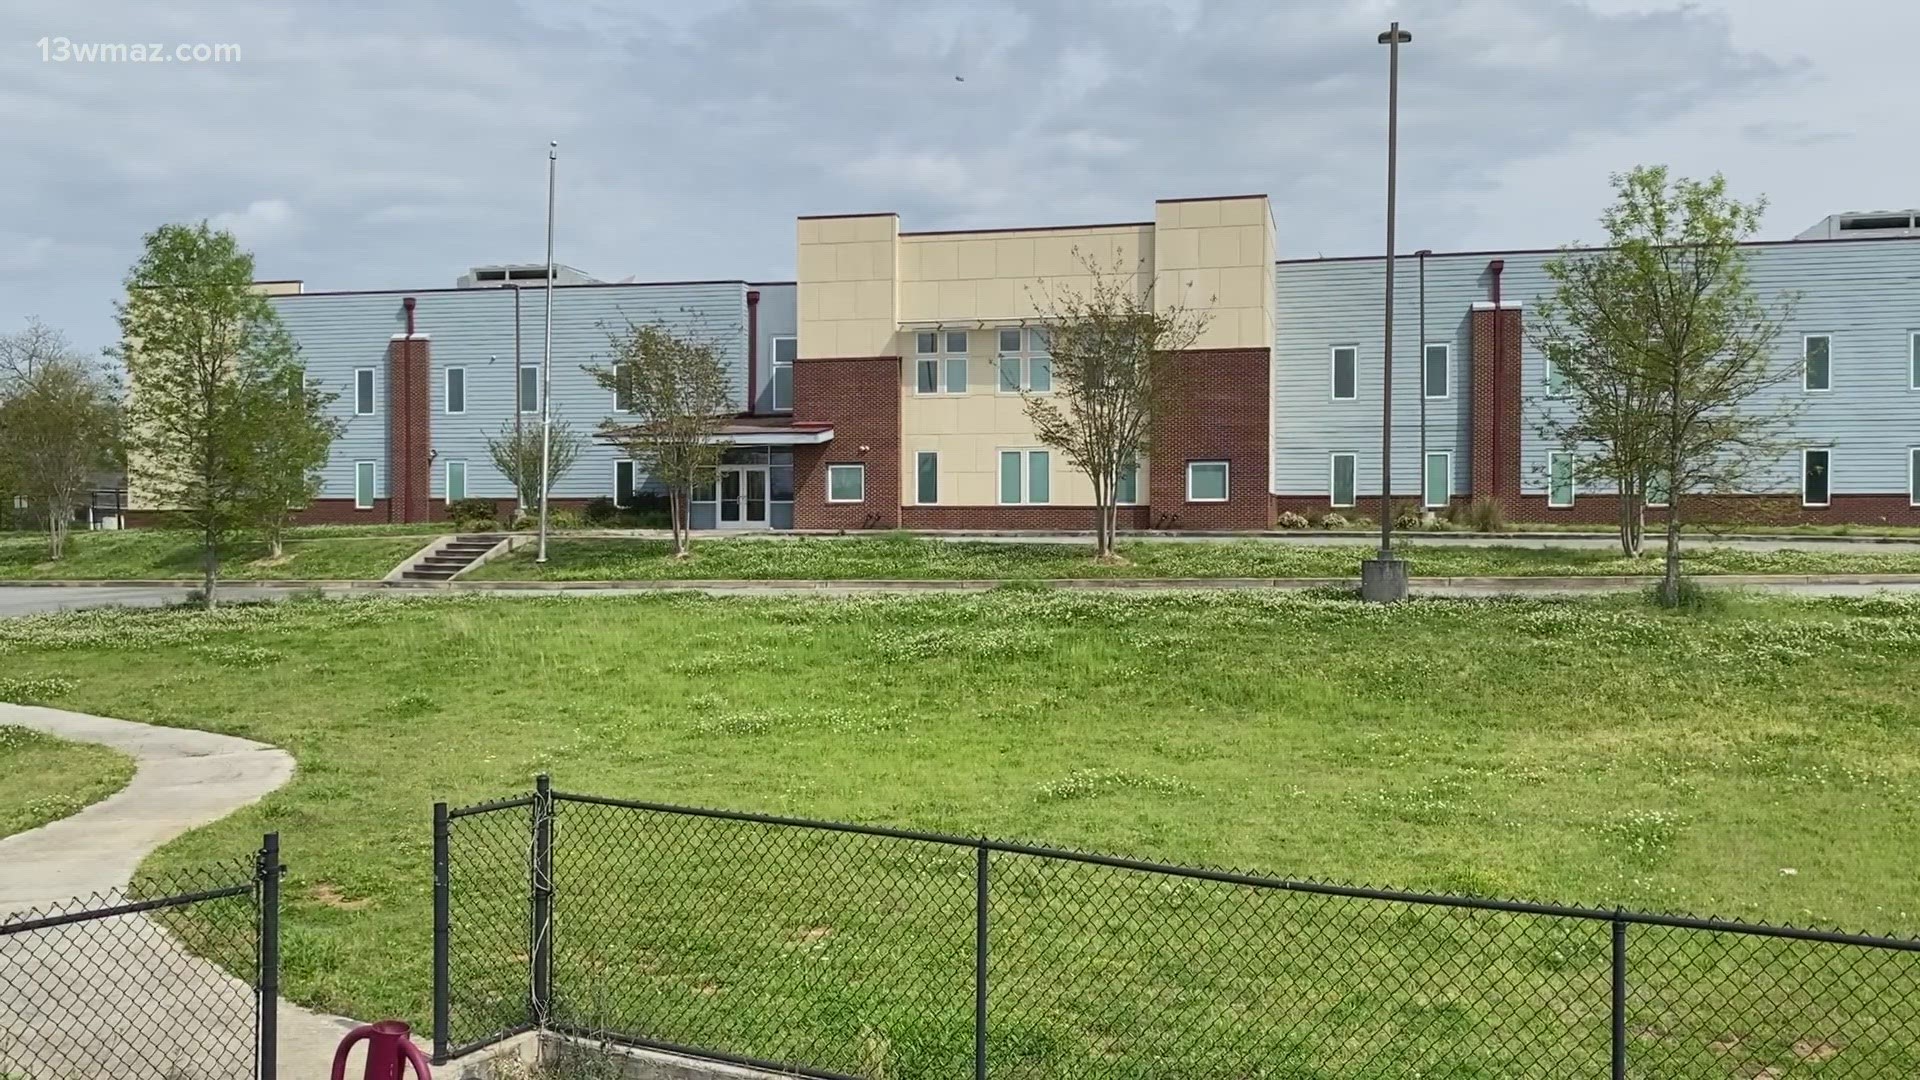 Bibb County is working with a developer to provide more affordable housing and commercial opportunities for the Pleasant Hill neighborhood.